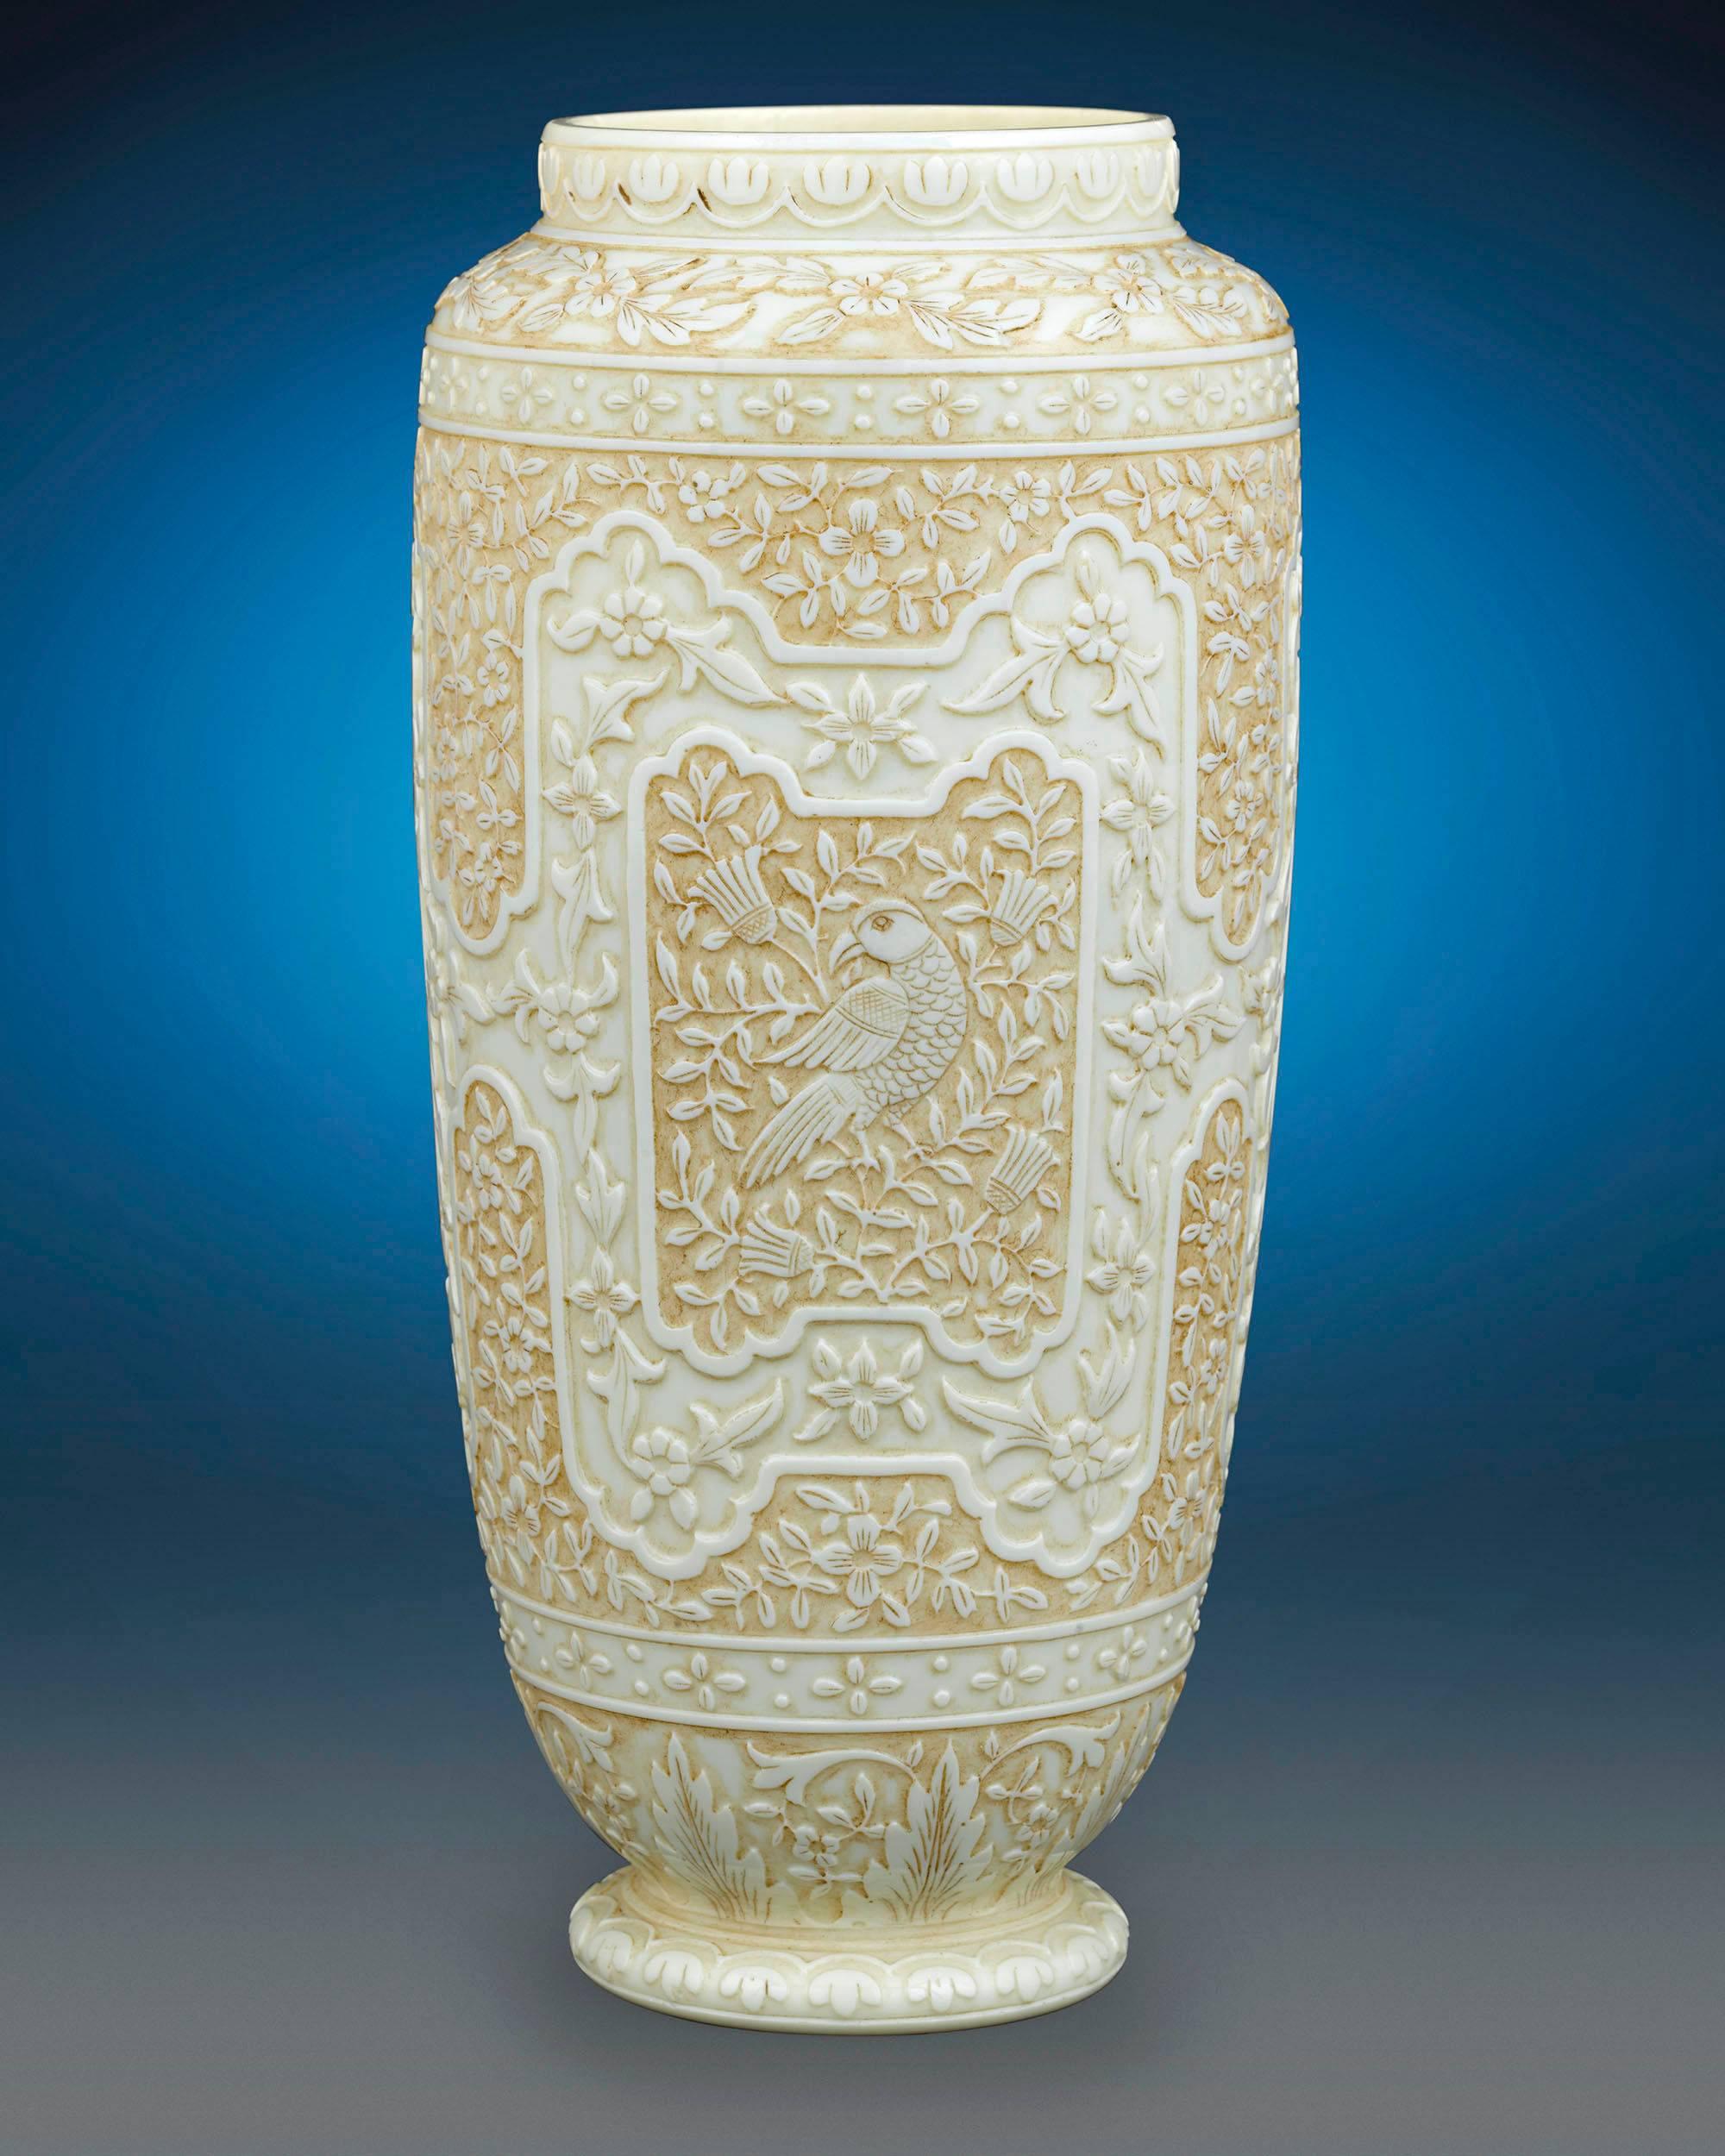 Exquisitely handcrafted to mimic the subtle luxury of ivory, these cameo glass vases by Thomas Webb & Sons are a remarkable rarity. Webb first developed its celebrated ivory glass in the early 1880s, an era of remarkable inventiveness for the famed